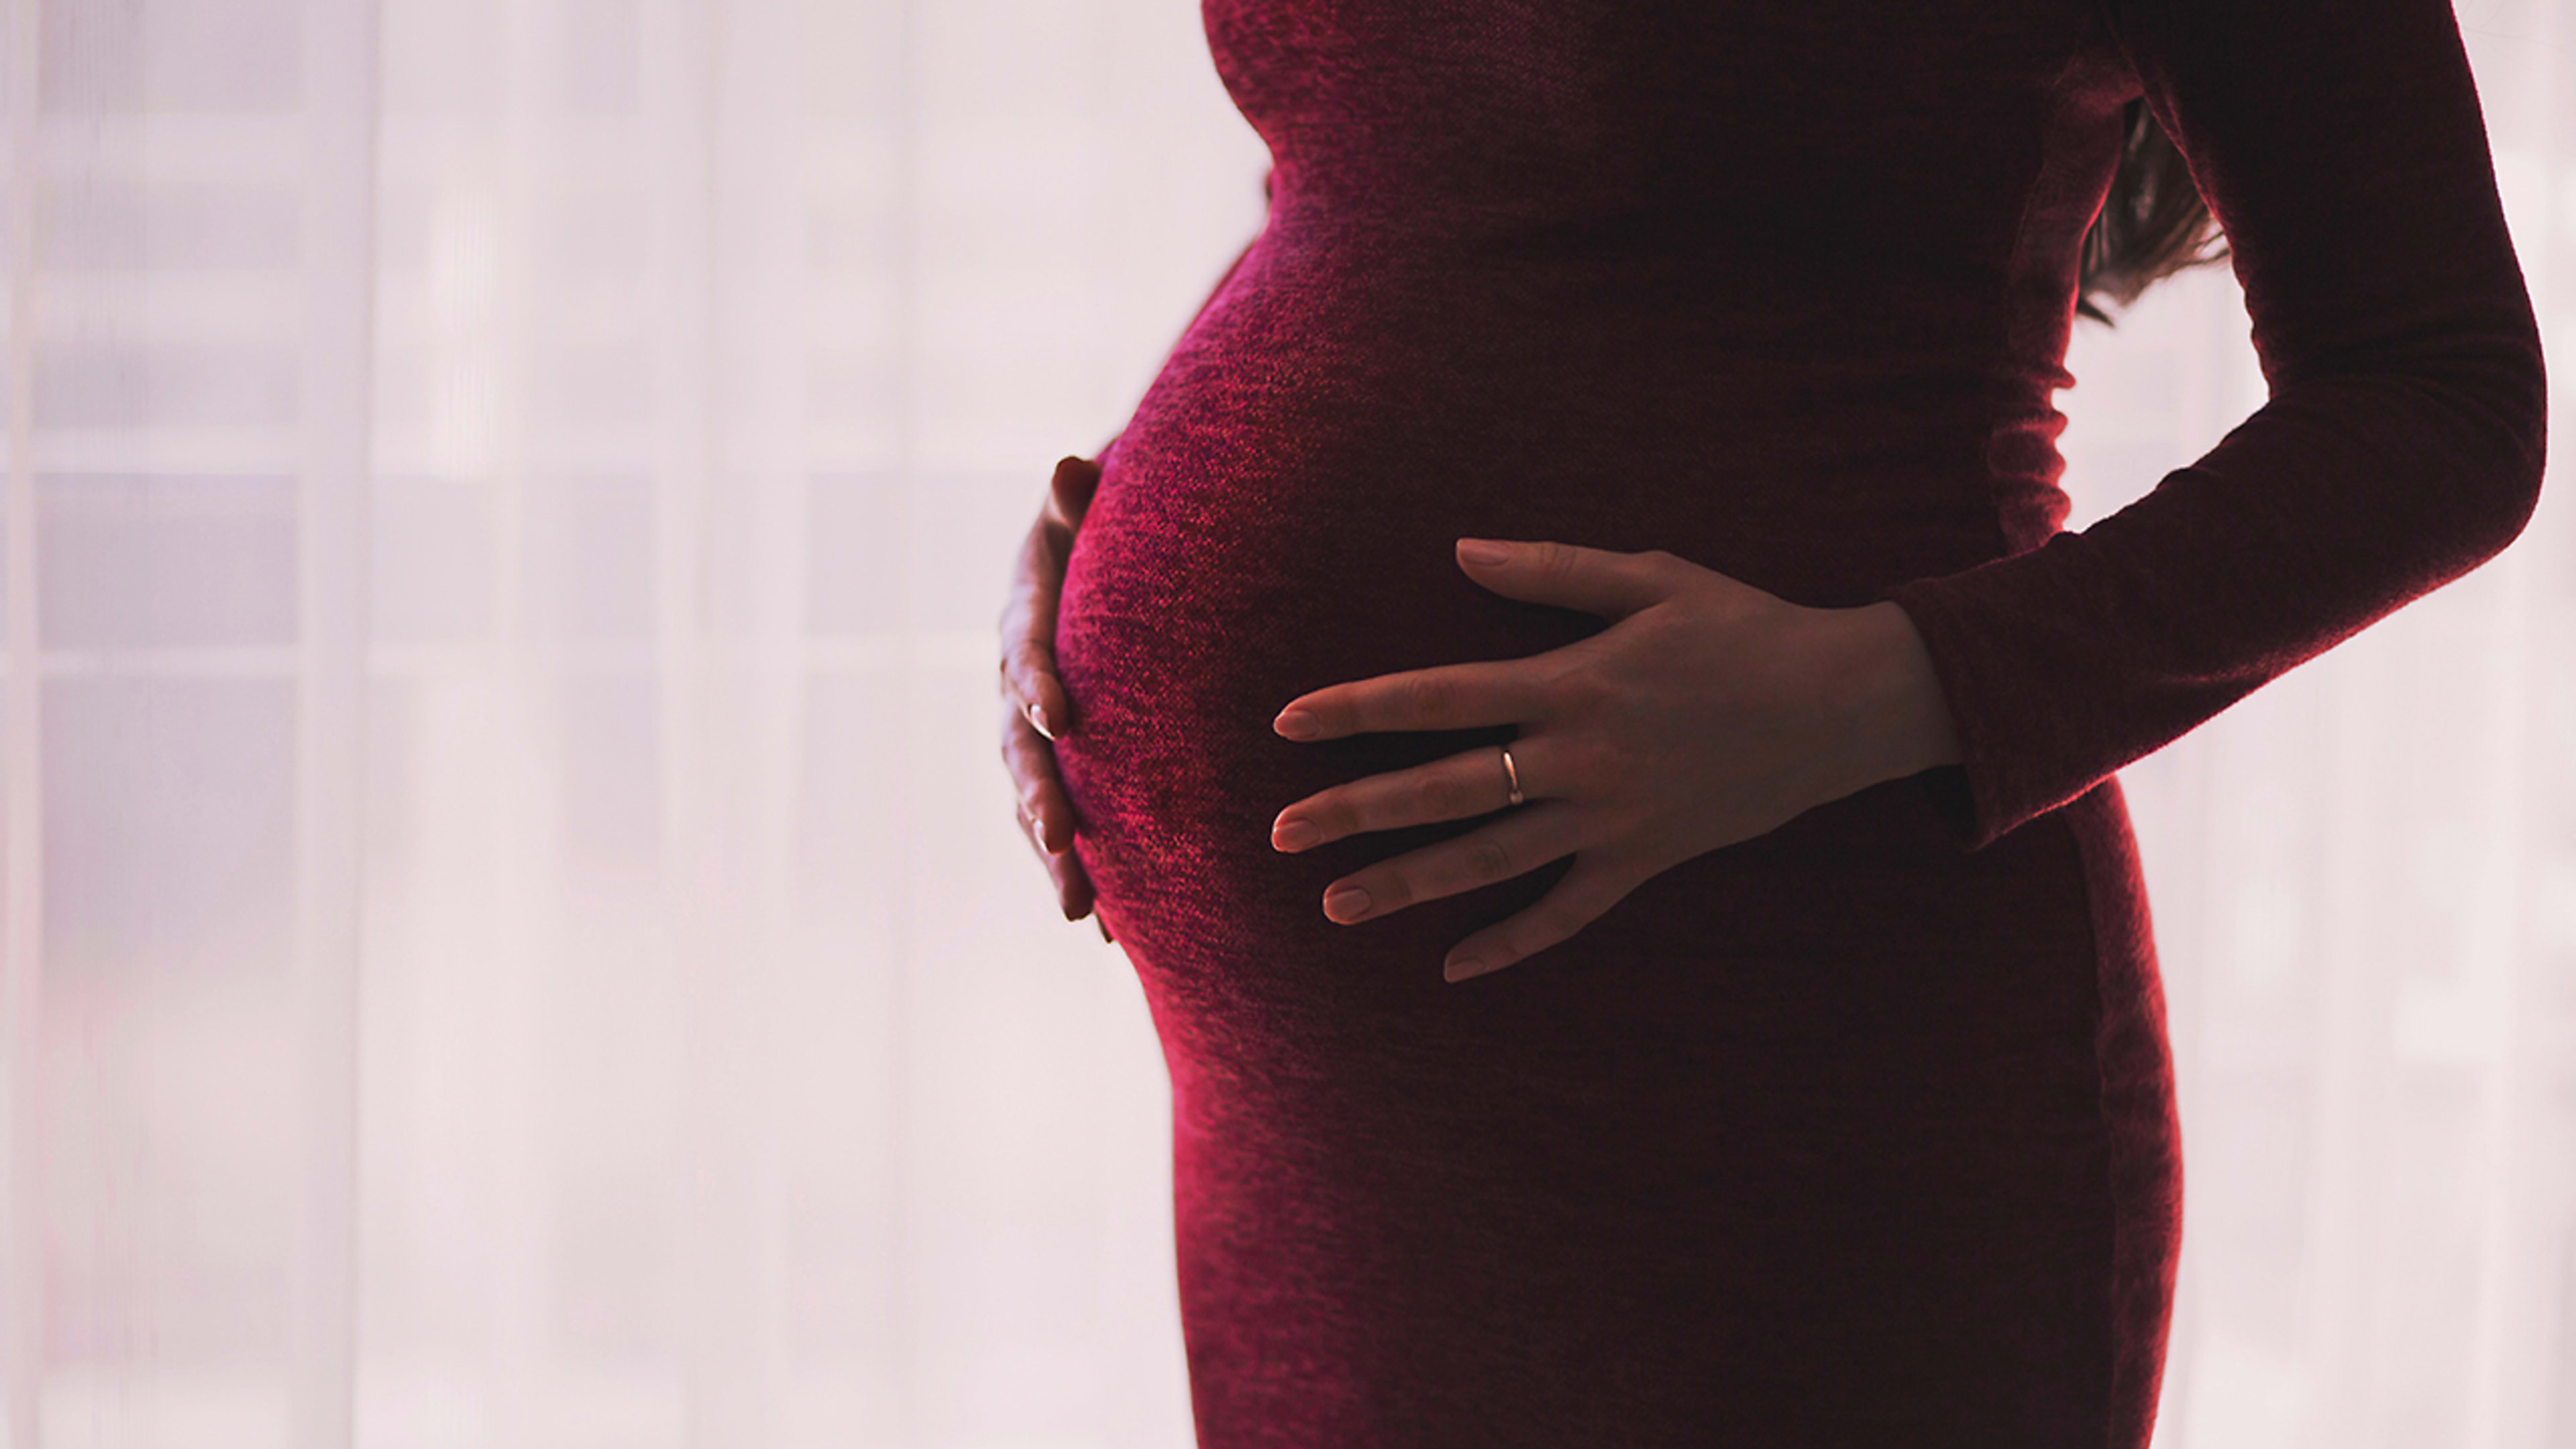 Here’s what happened when I interviewed for a new job while heavily pregnant